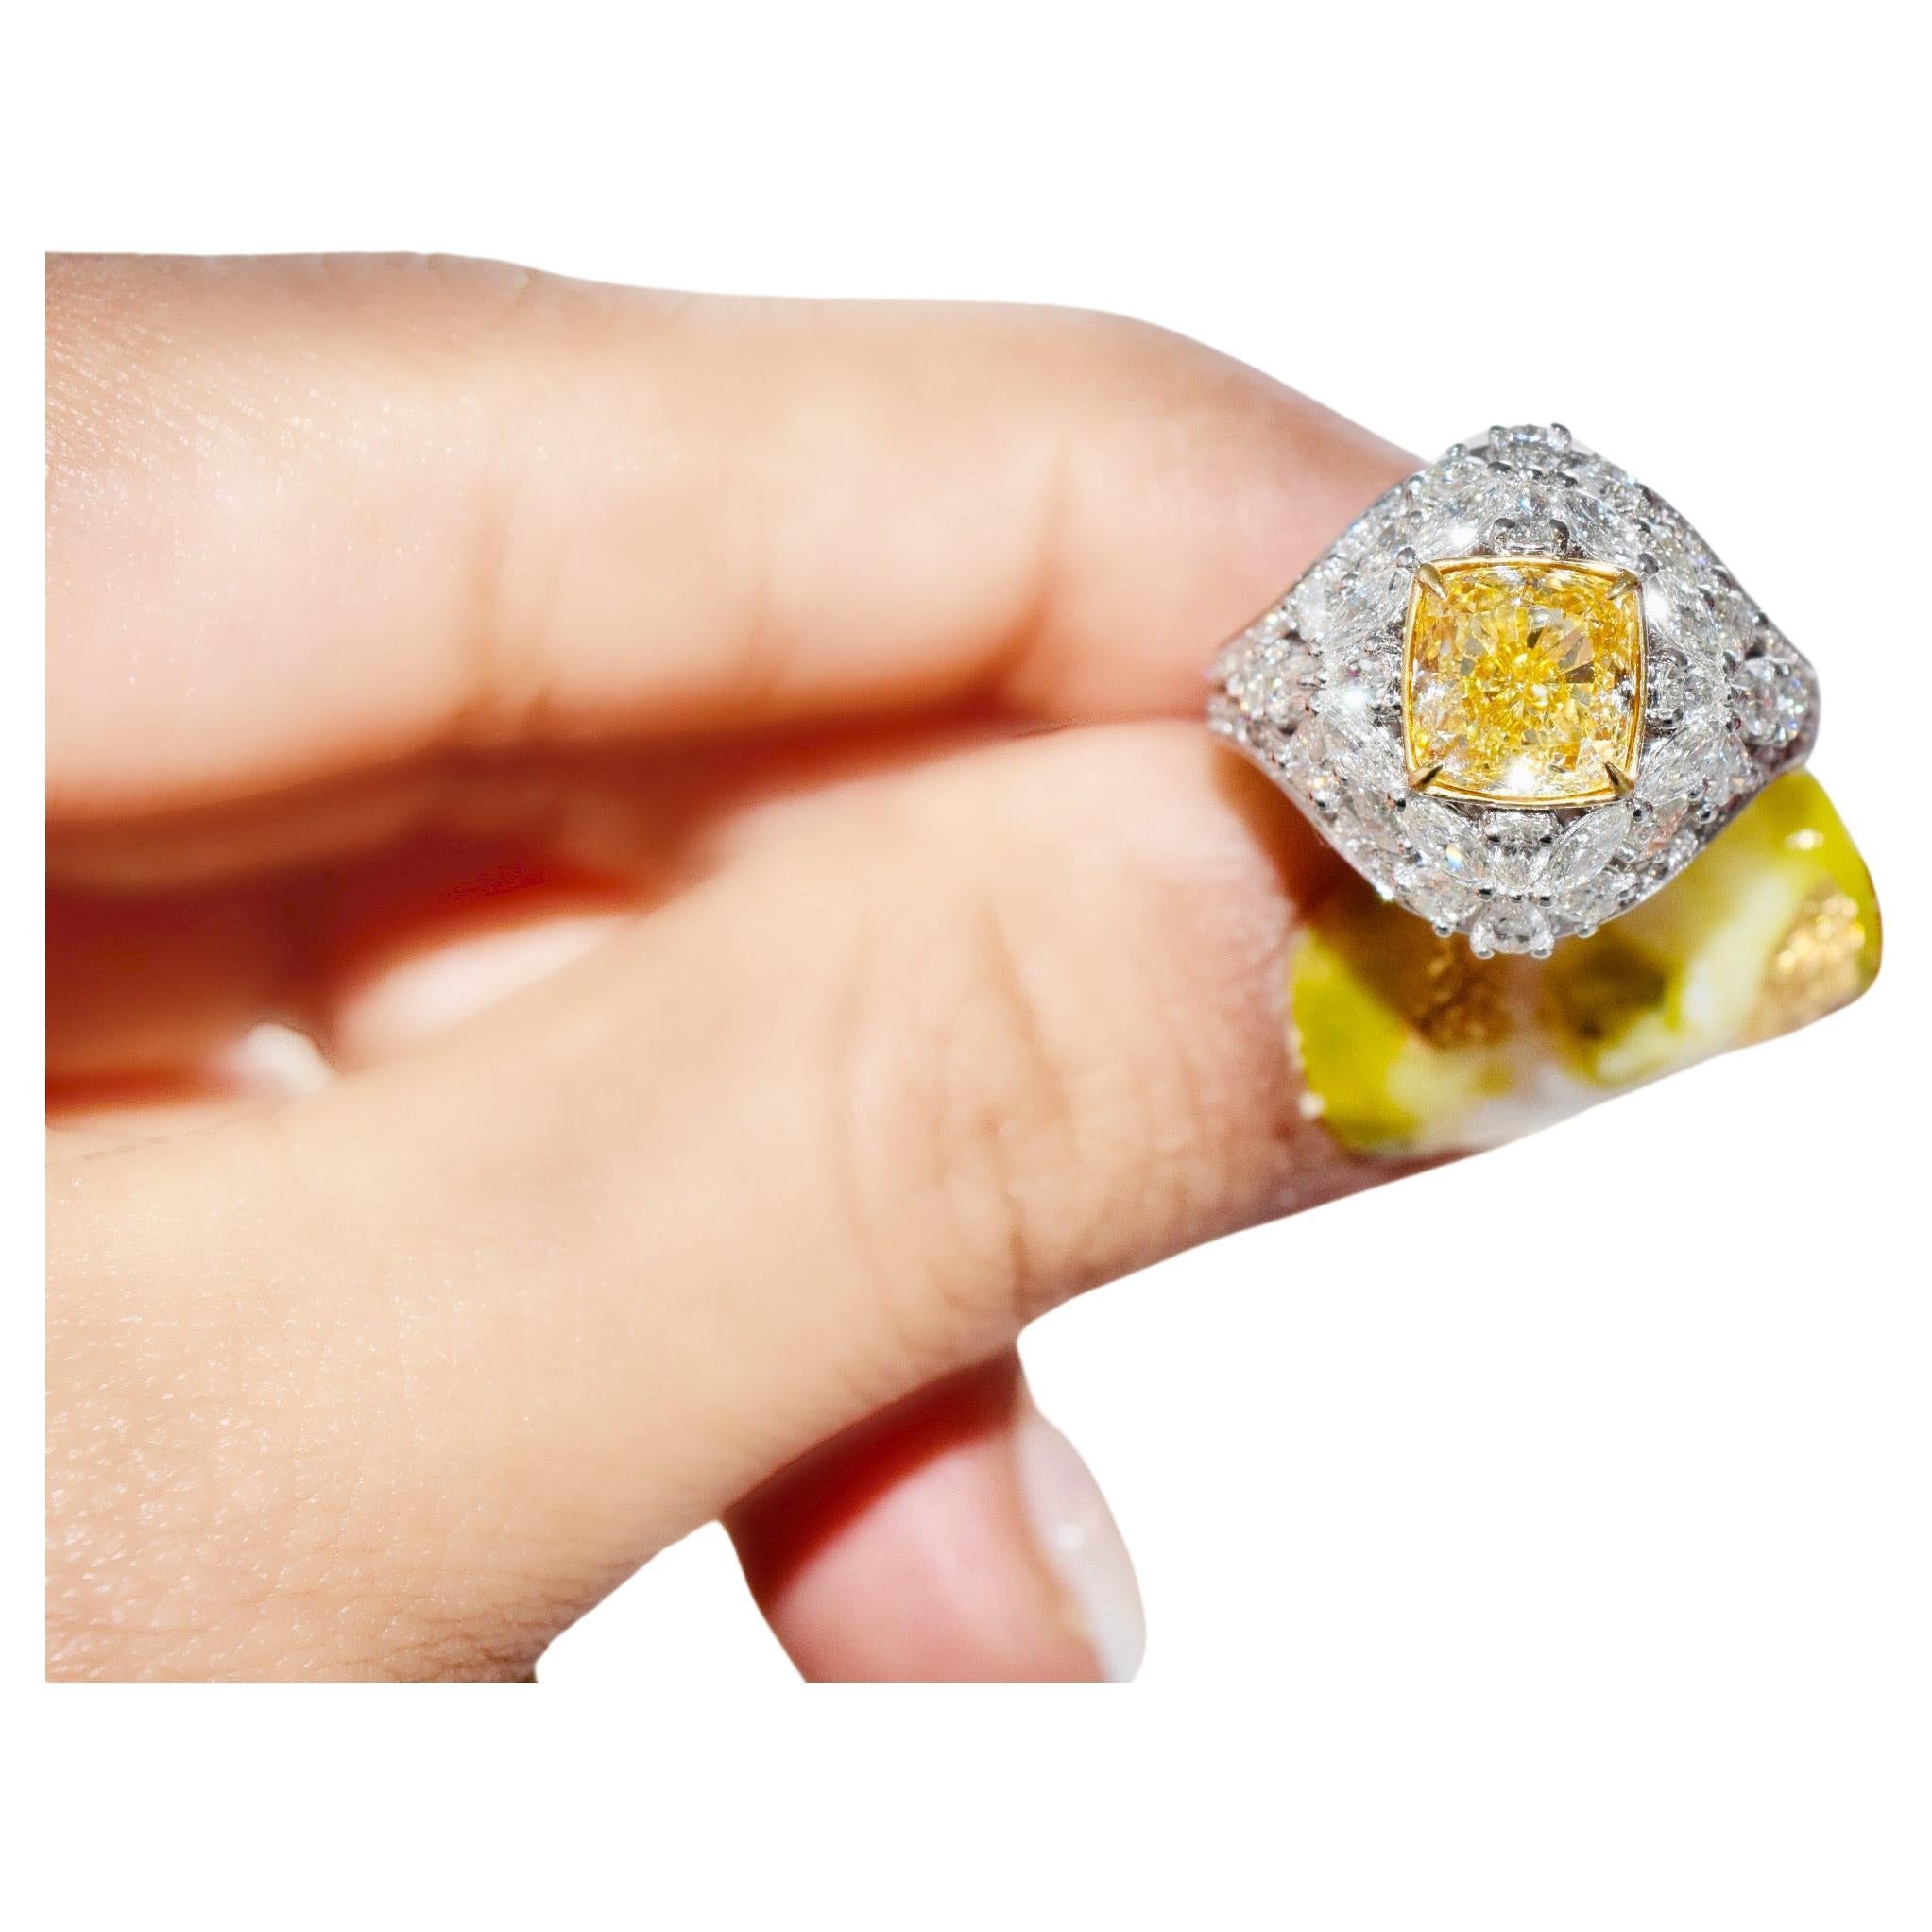 2.00 Carat Diamond Ring I1 Clarity GIA Certified For Sale